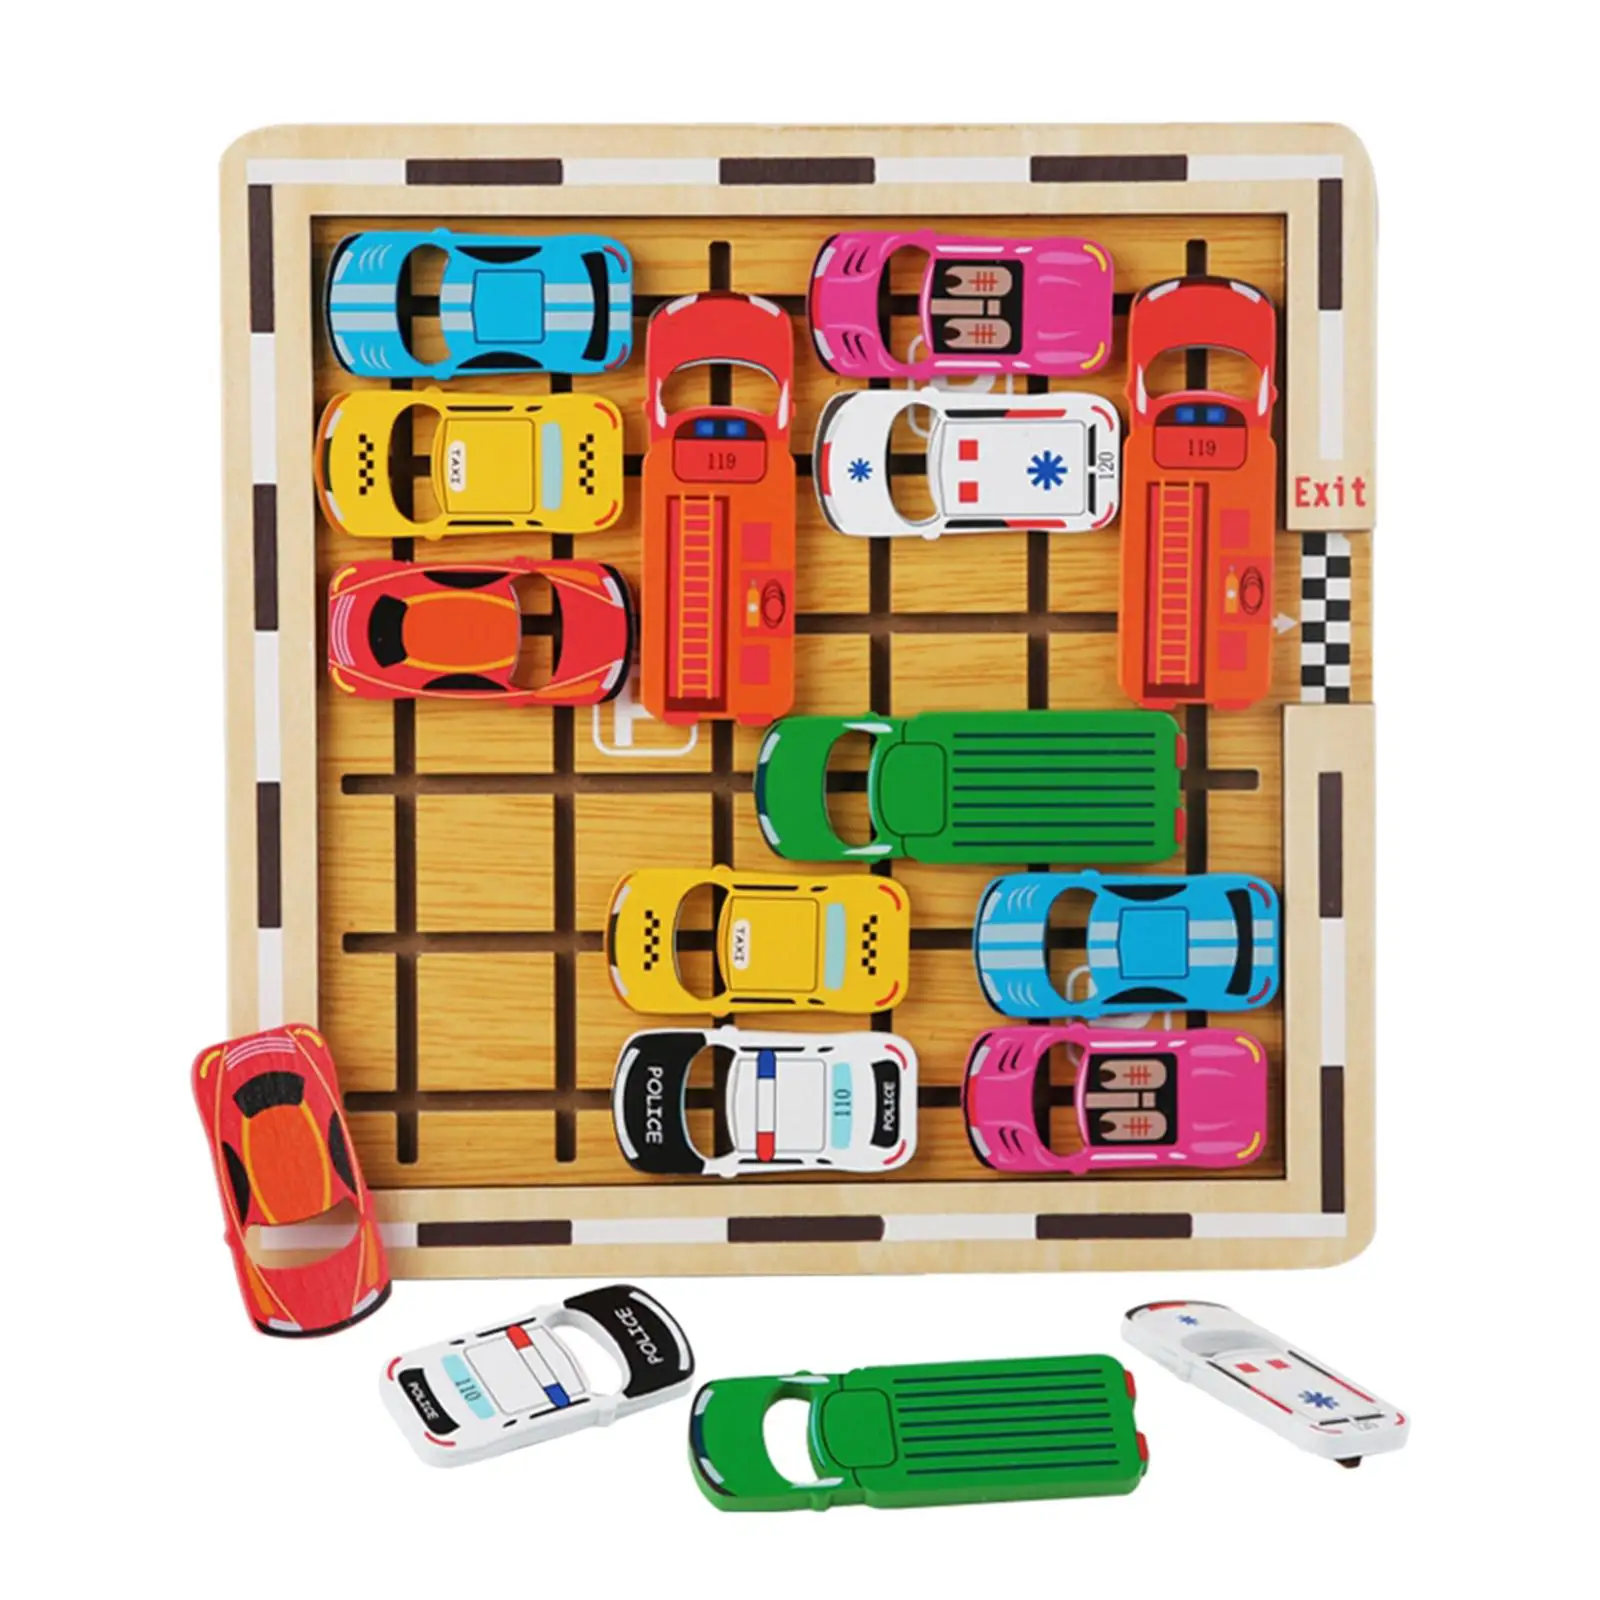 Wooden Early Education Car Development Educational Toys Logical Thinking Training Fine Motor Skills for Toddlers Kids Boys Gifts